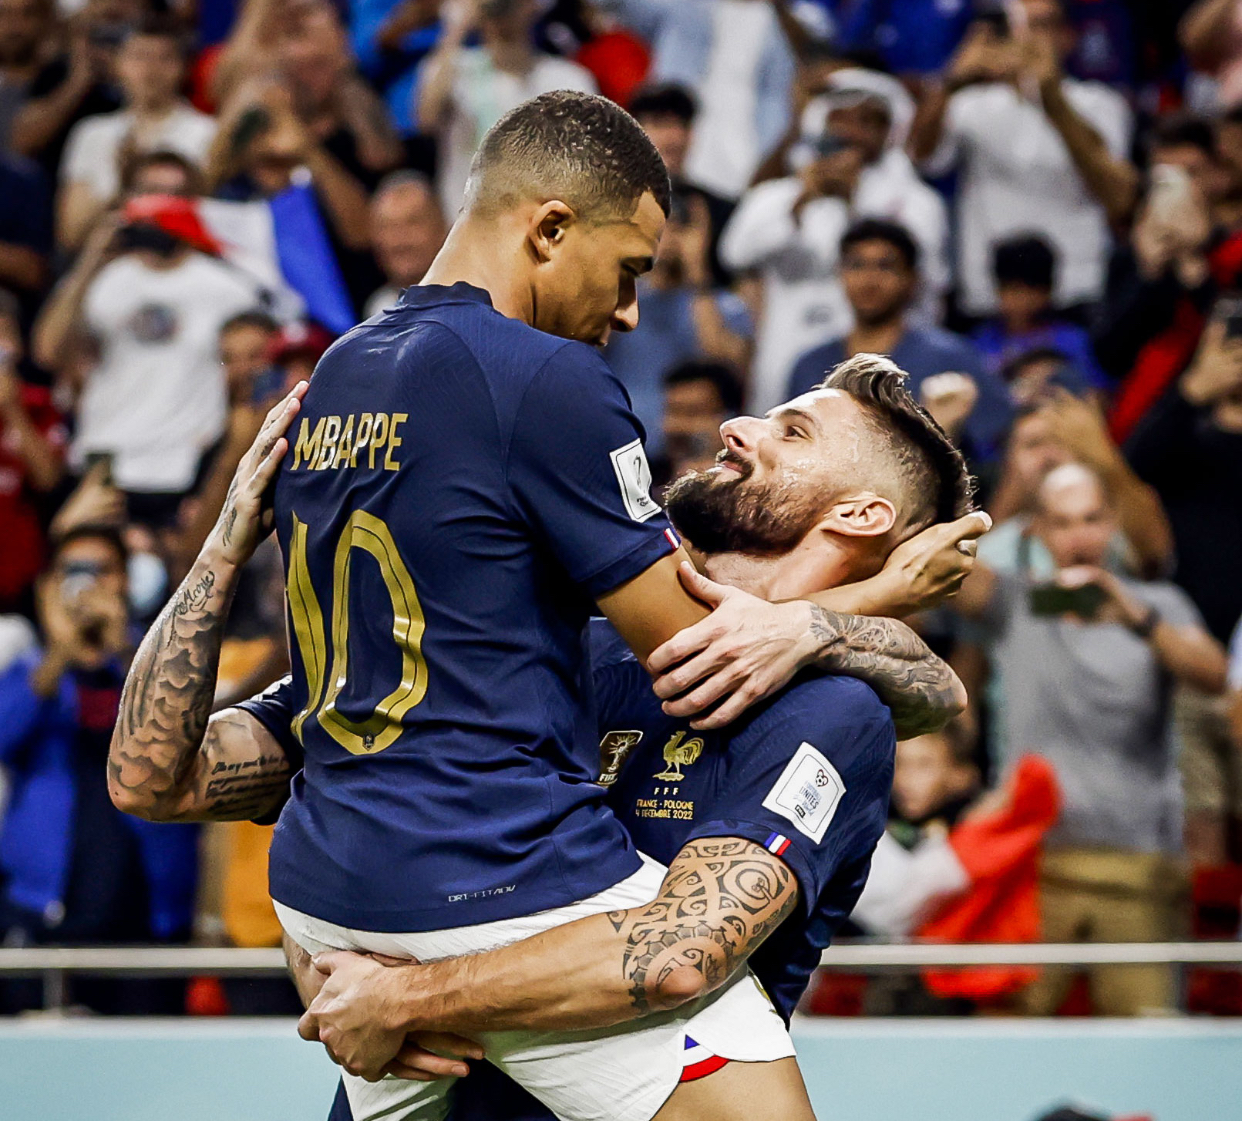 Giroud Breaks Record, Mbappe Bags Brace As France Overcome Poland To Book Quarter-final Spot